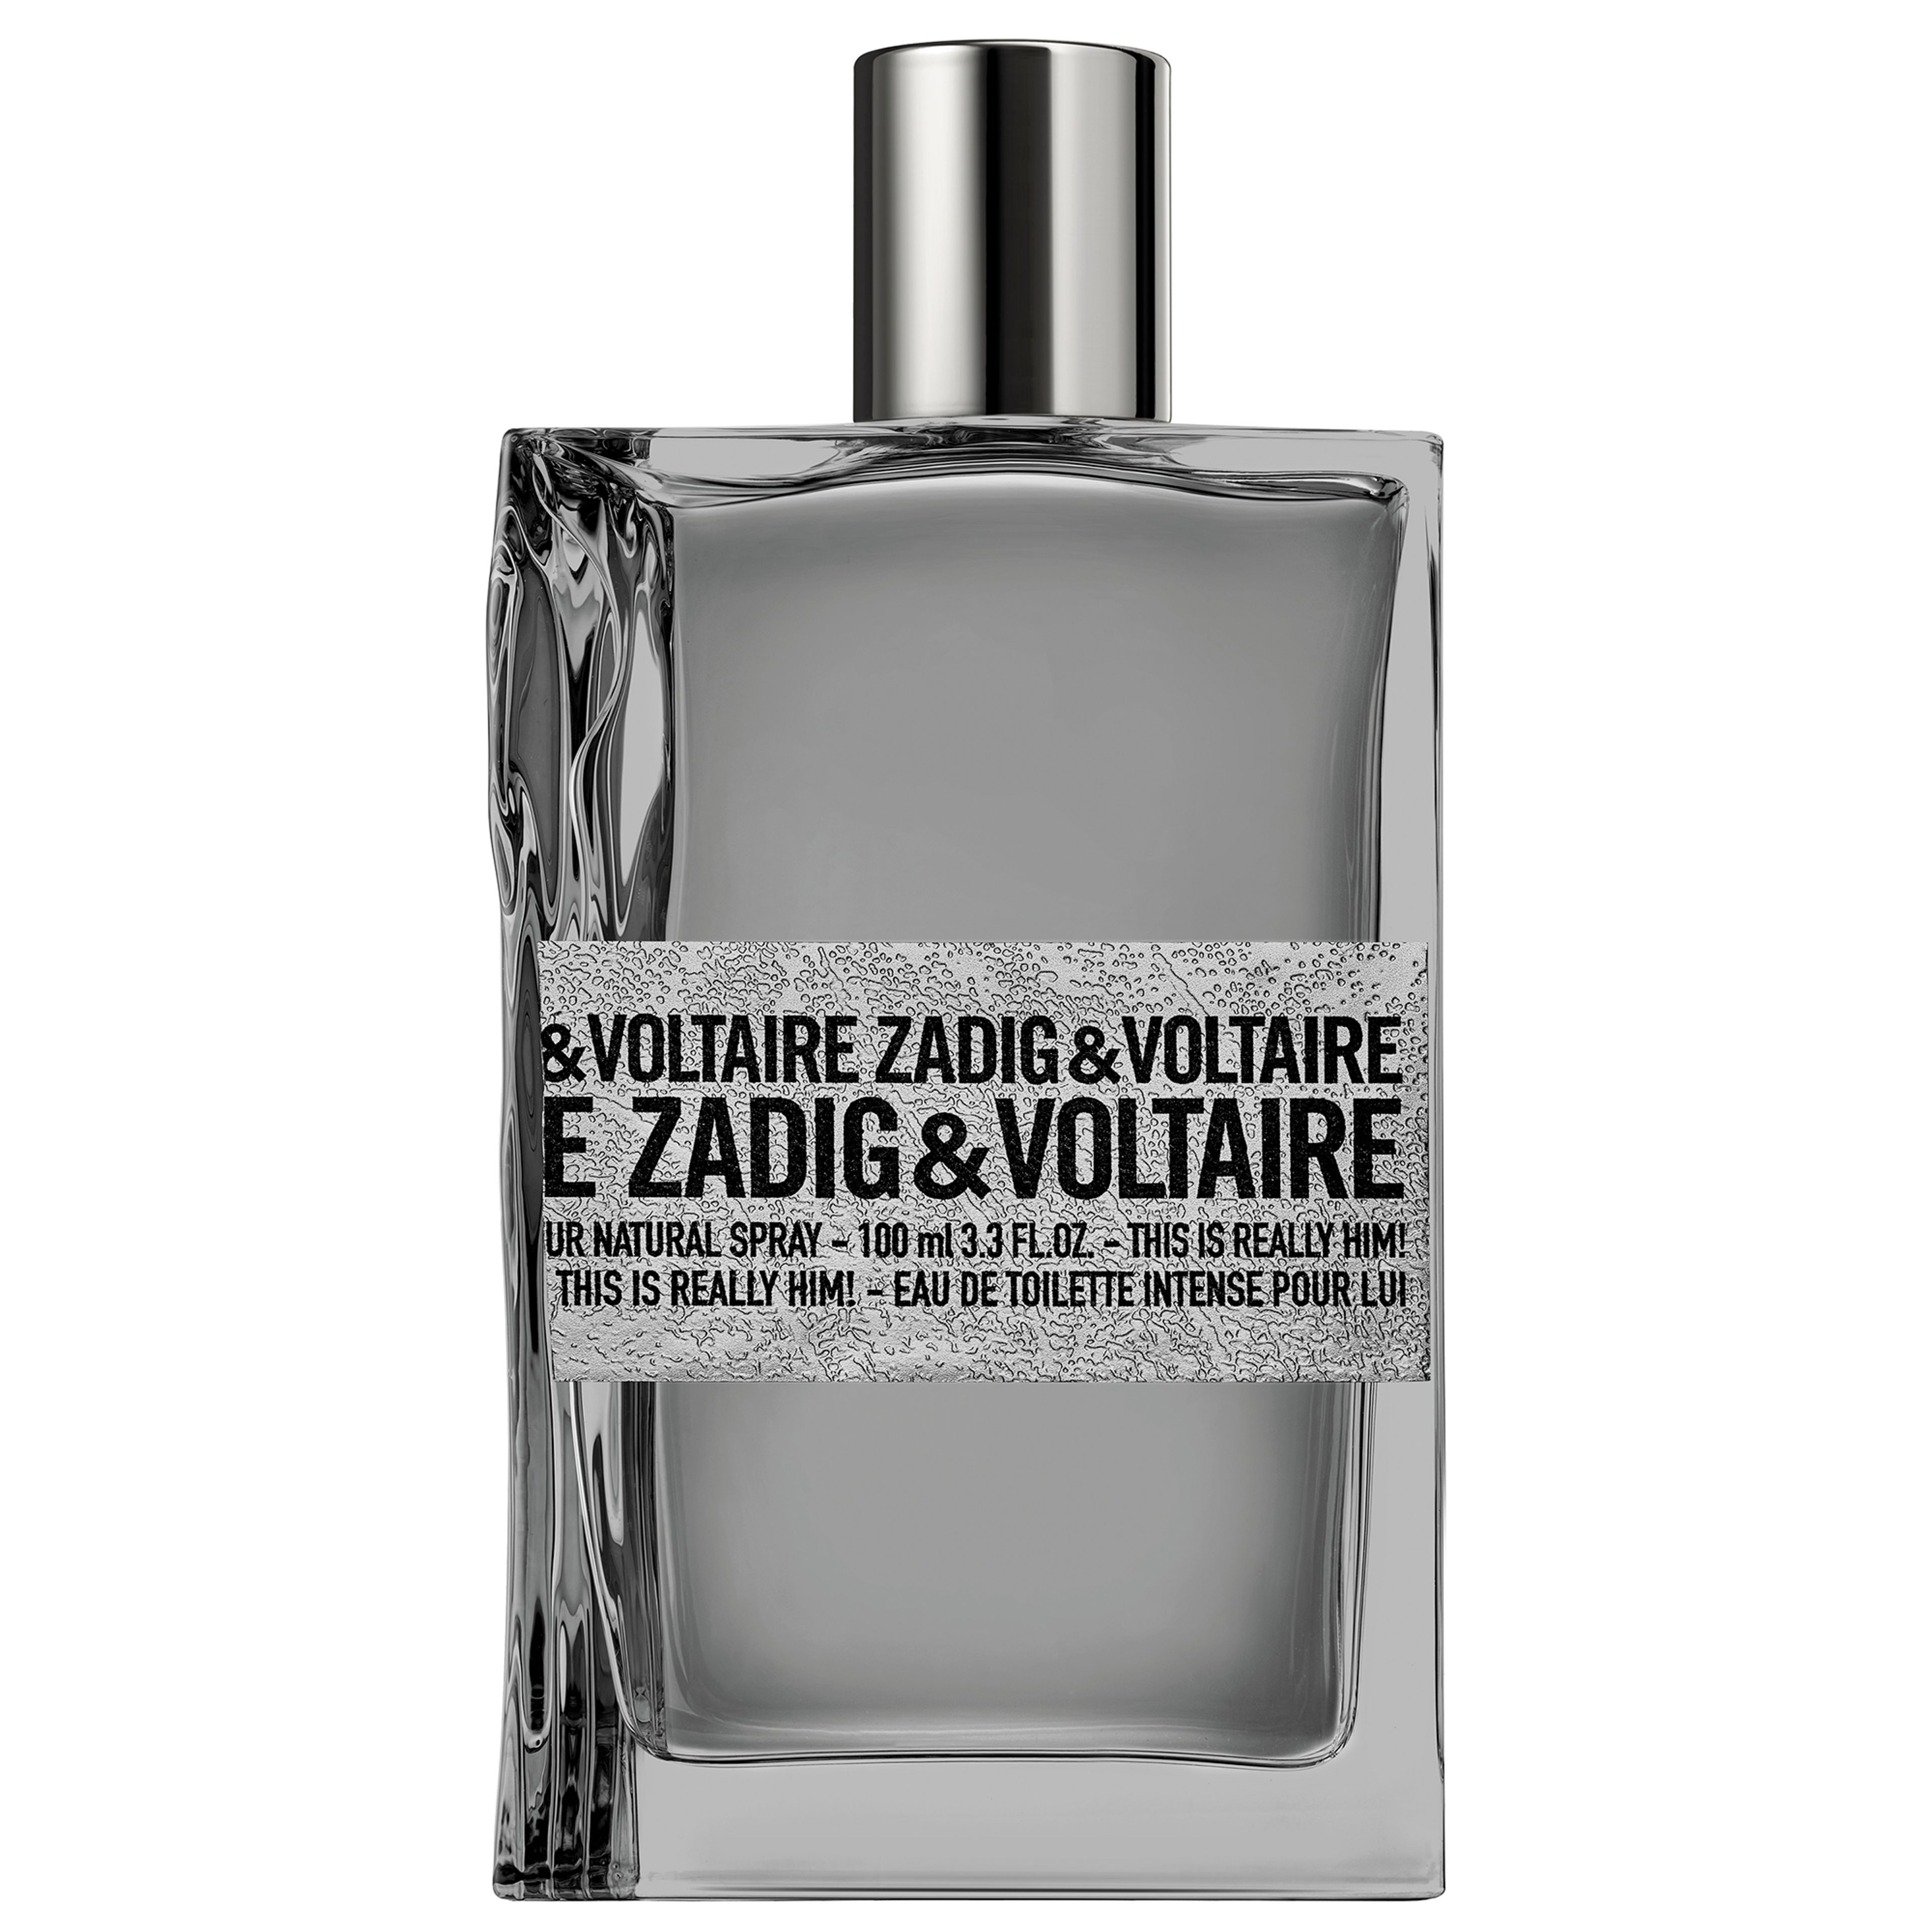 Zadig & Voltaire This Is Really Him! 1